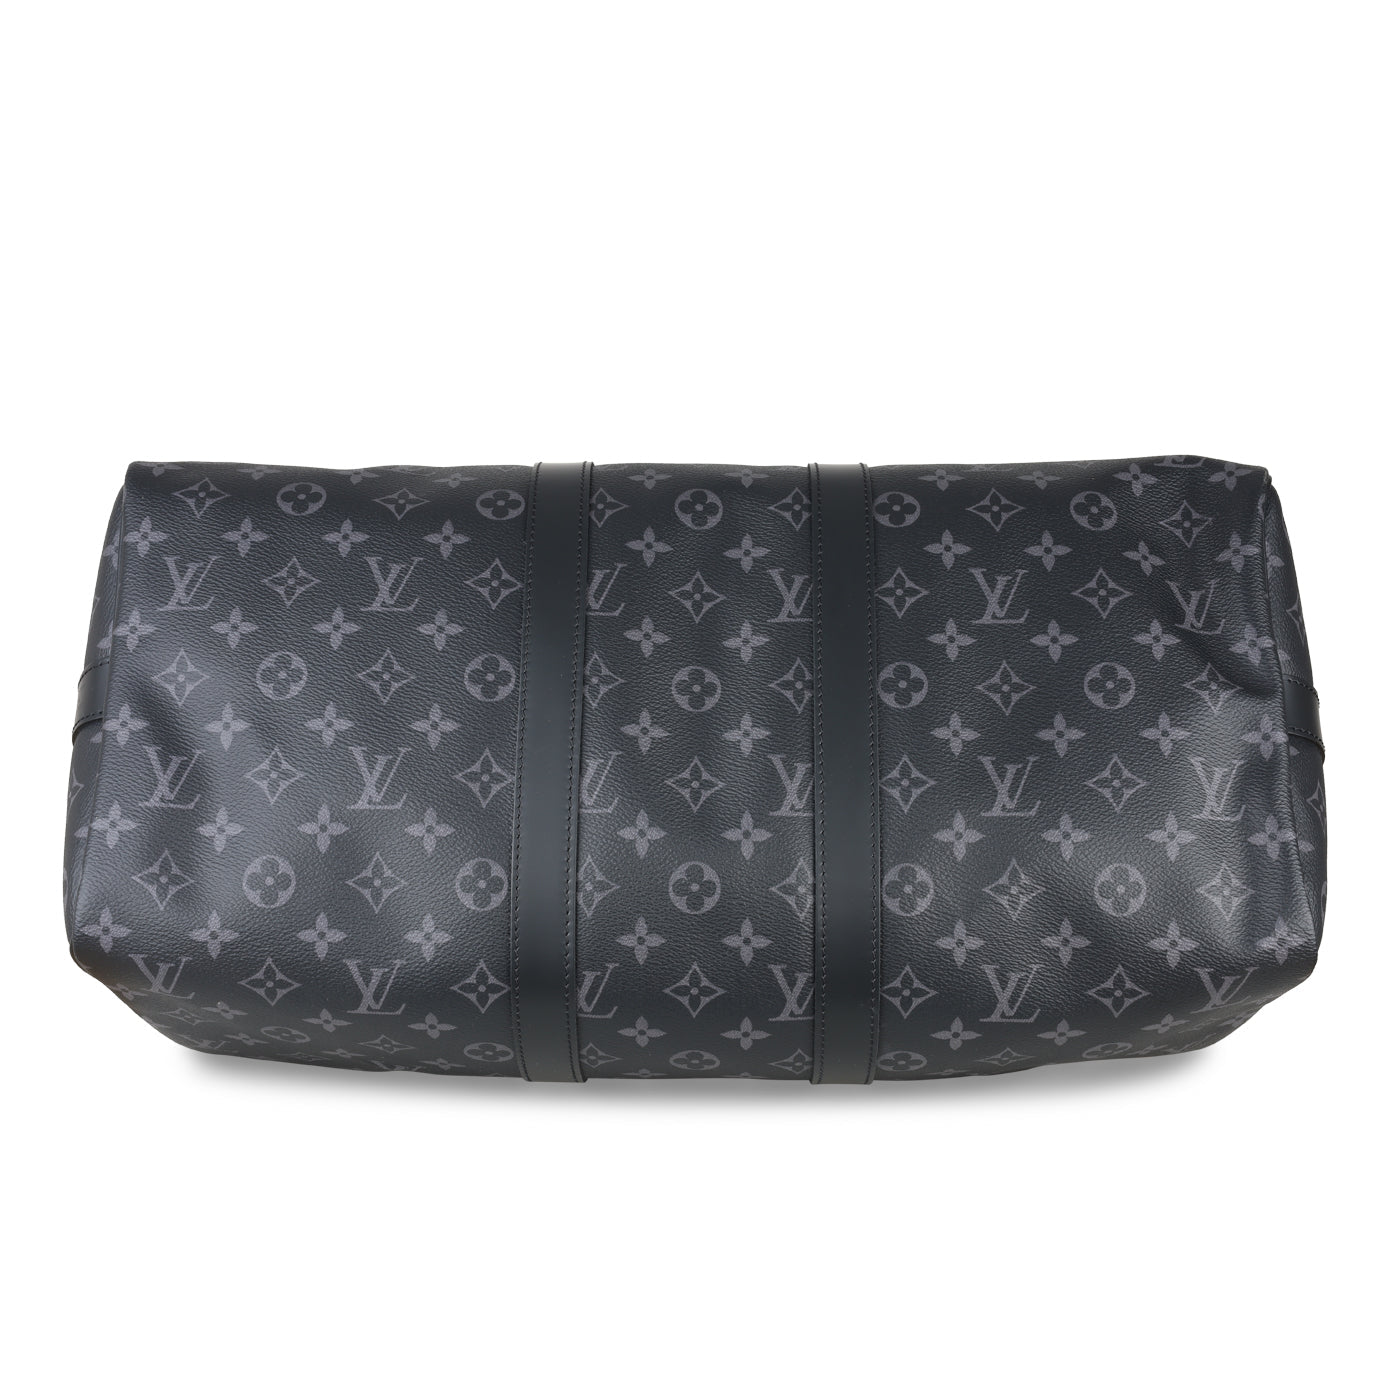 Looking to buy a Lv keepall size 45 in monogram eclipse, Been looking at  Nina or Darcy? Who would u pick? It's for everyday use. : r/DesignerReps